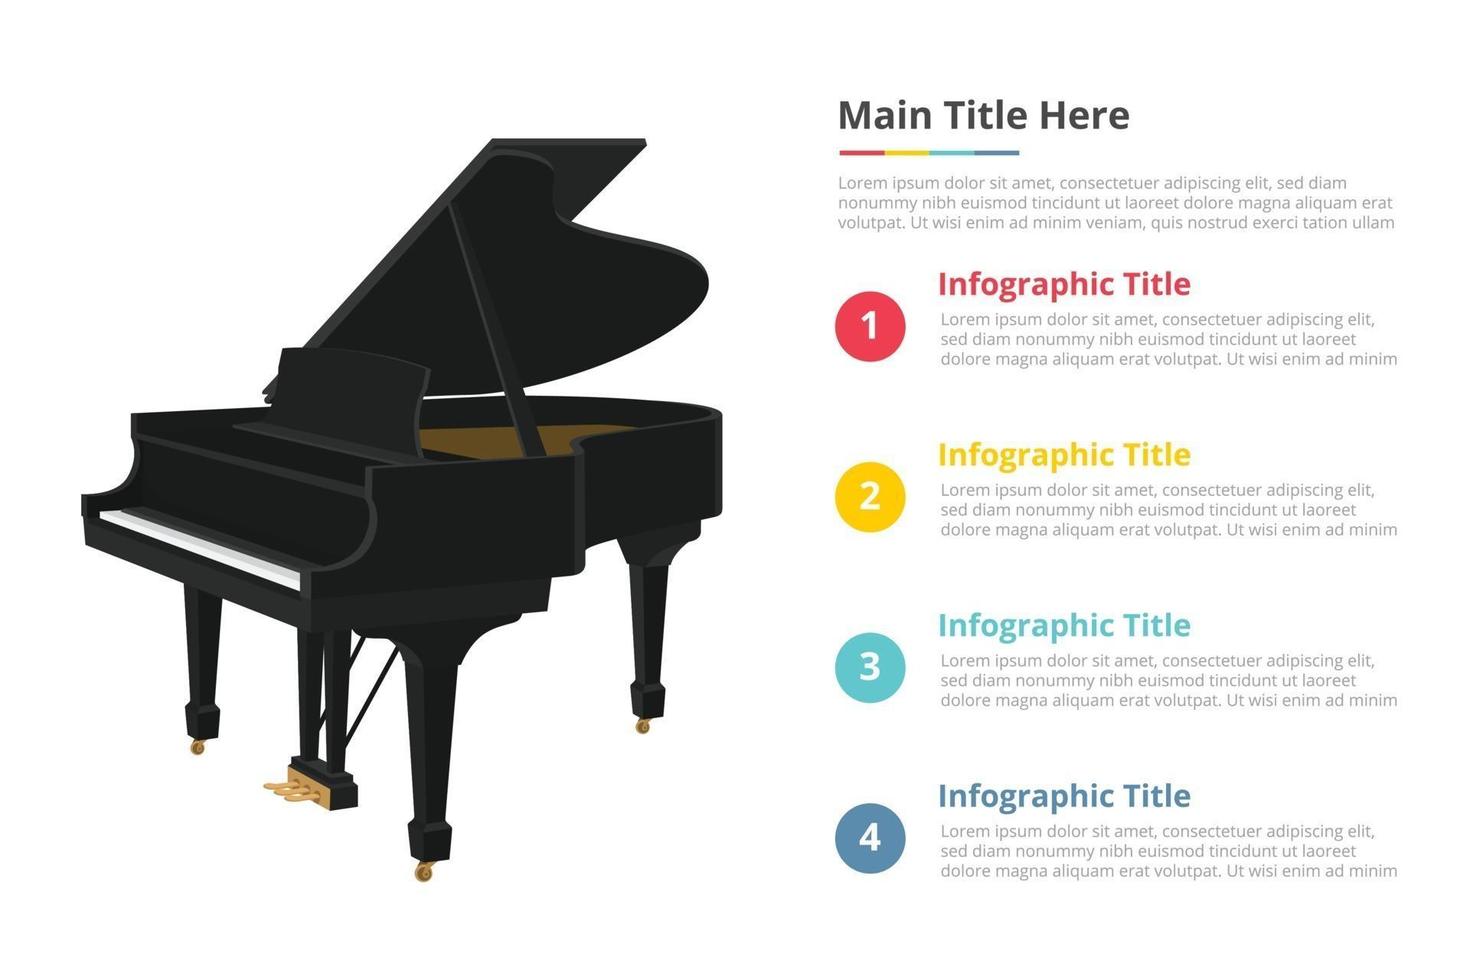 piano infographic template with 4 points of free space text description - vector illustration